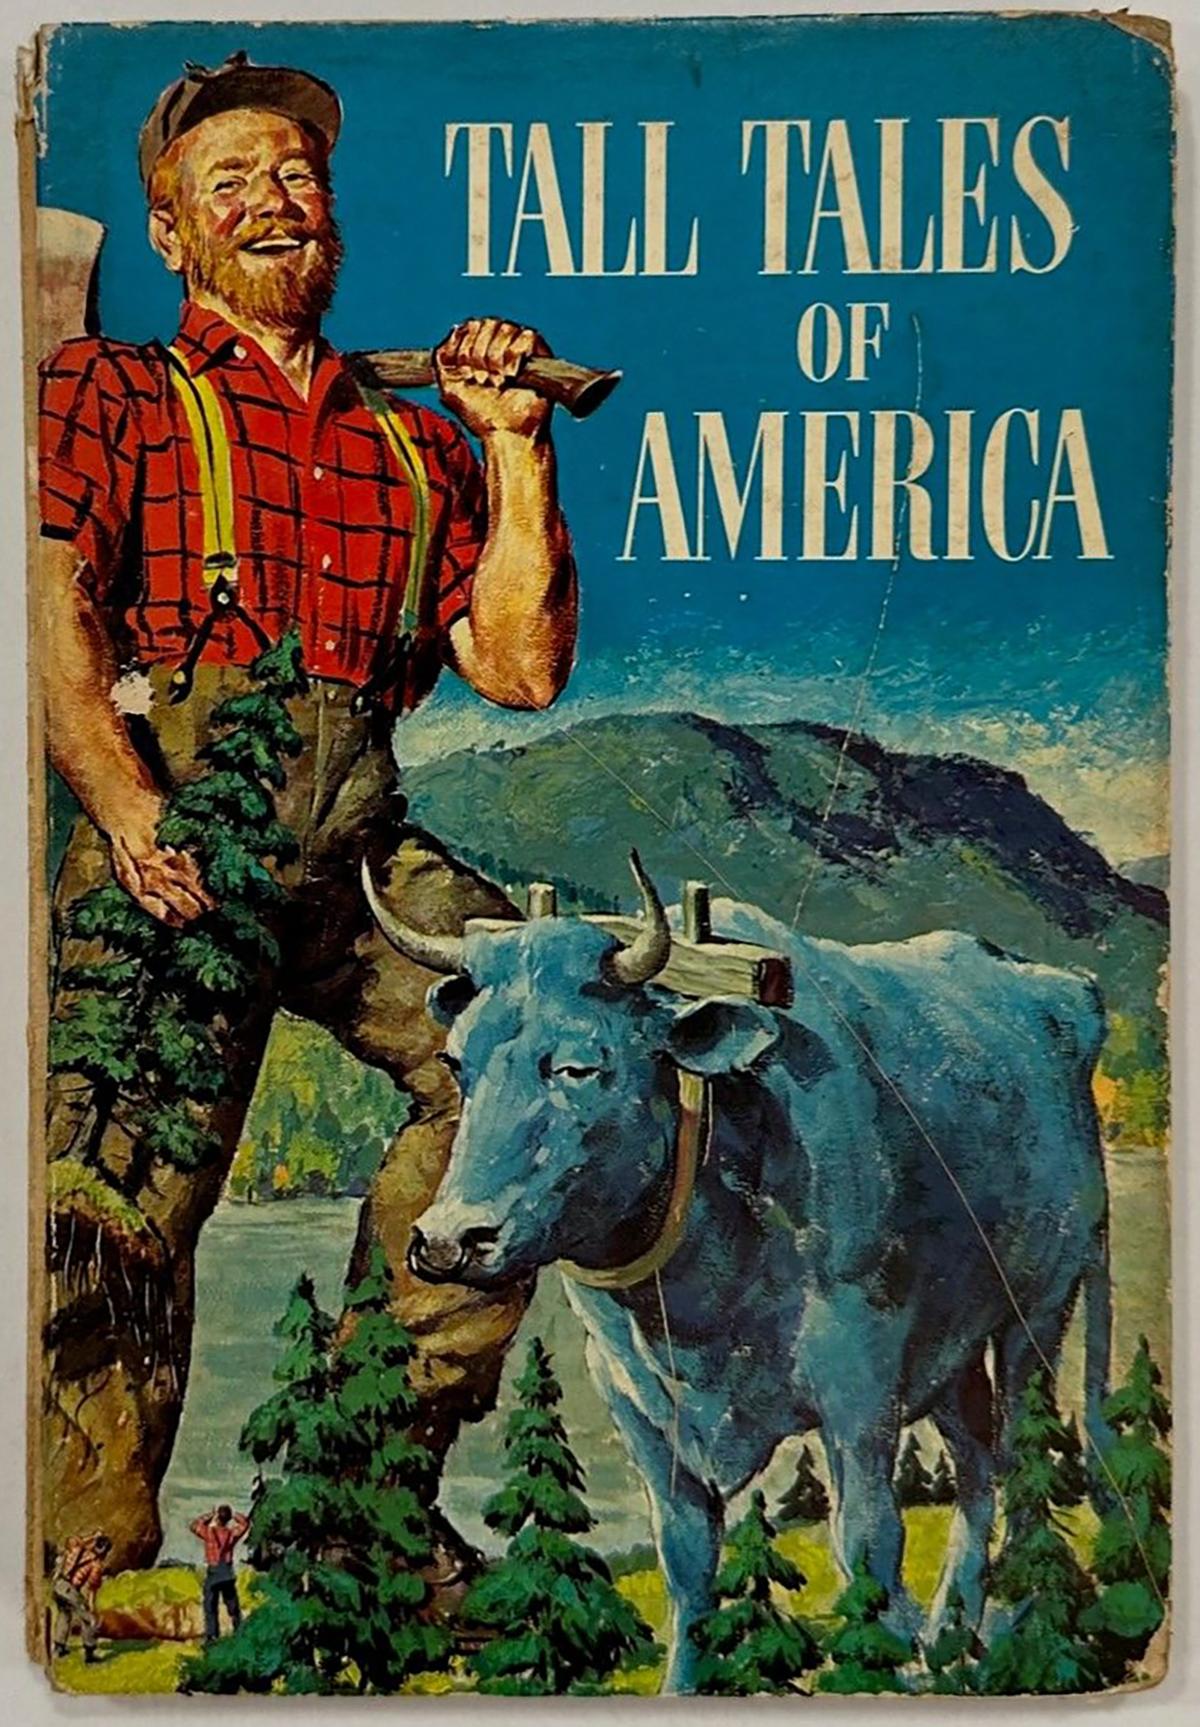 Book cover for "Tall Tales of America,"1958, with illustrations by Al Schmidt. (Guild Press, Inc.)